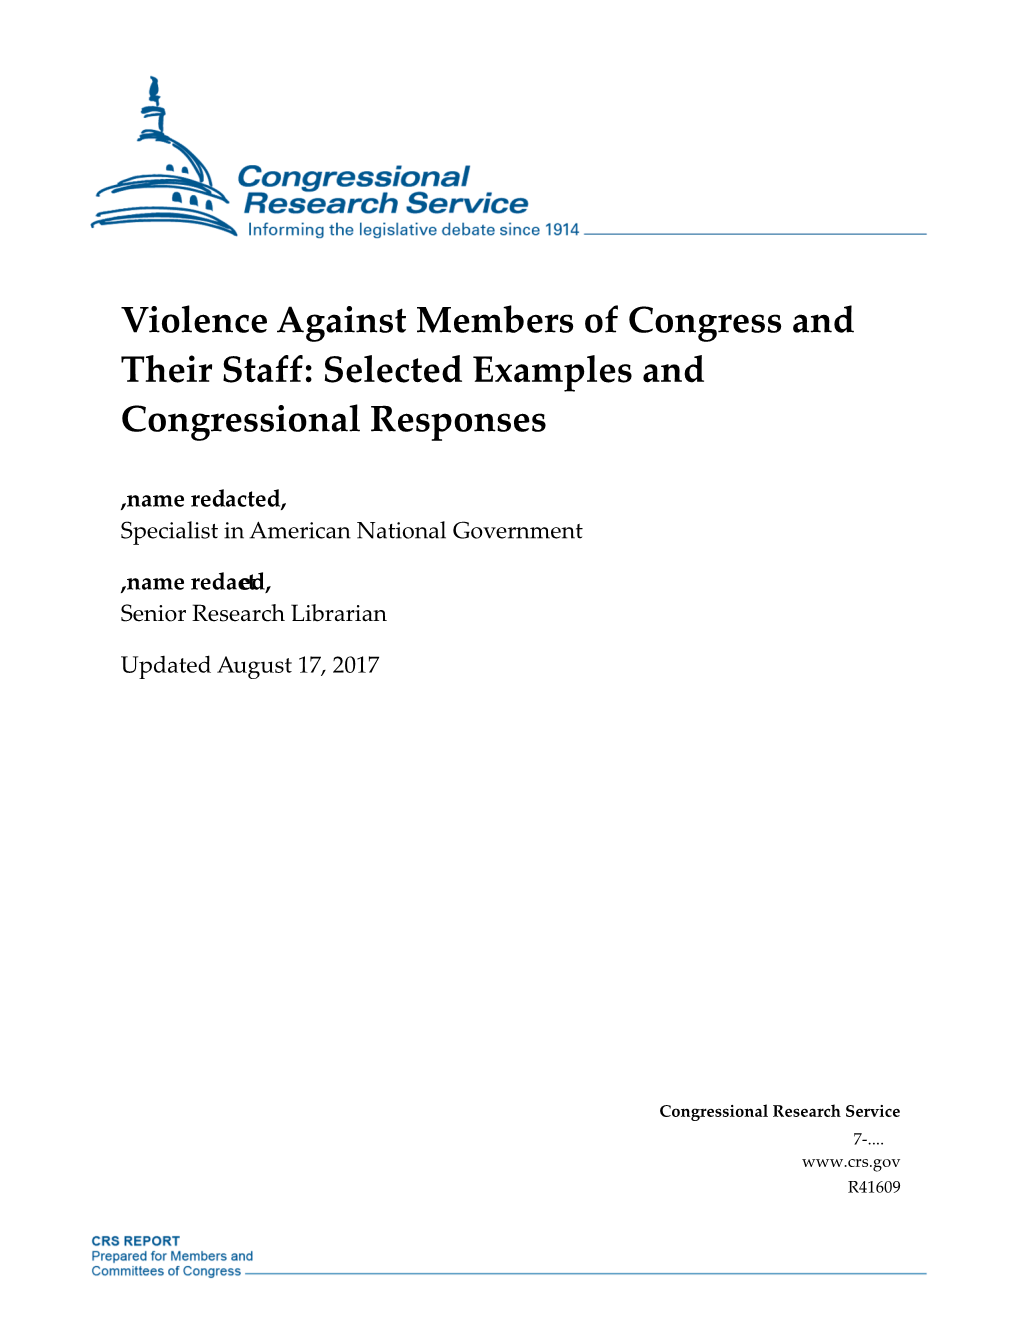 Violence Against Congressional Staff